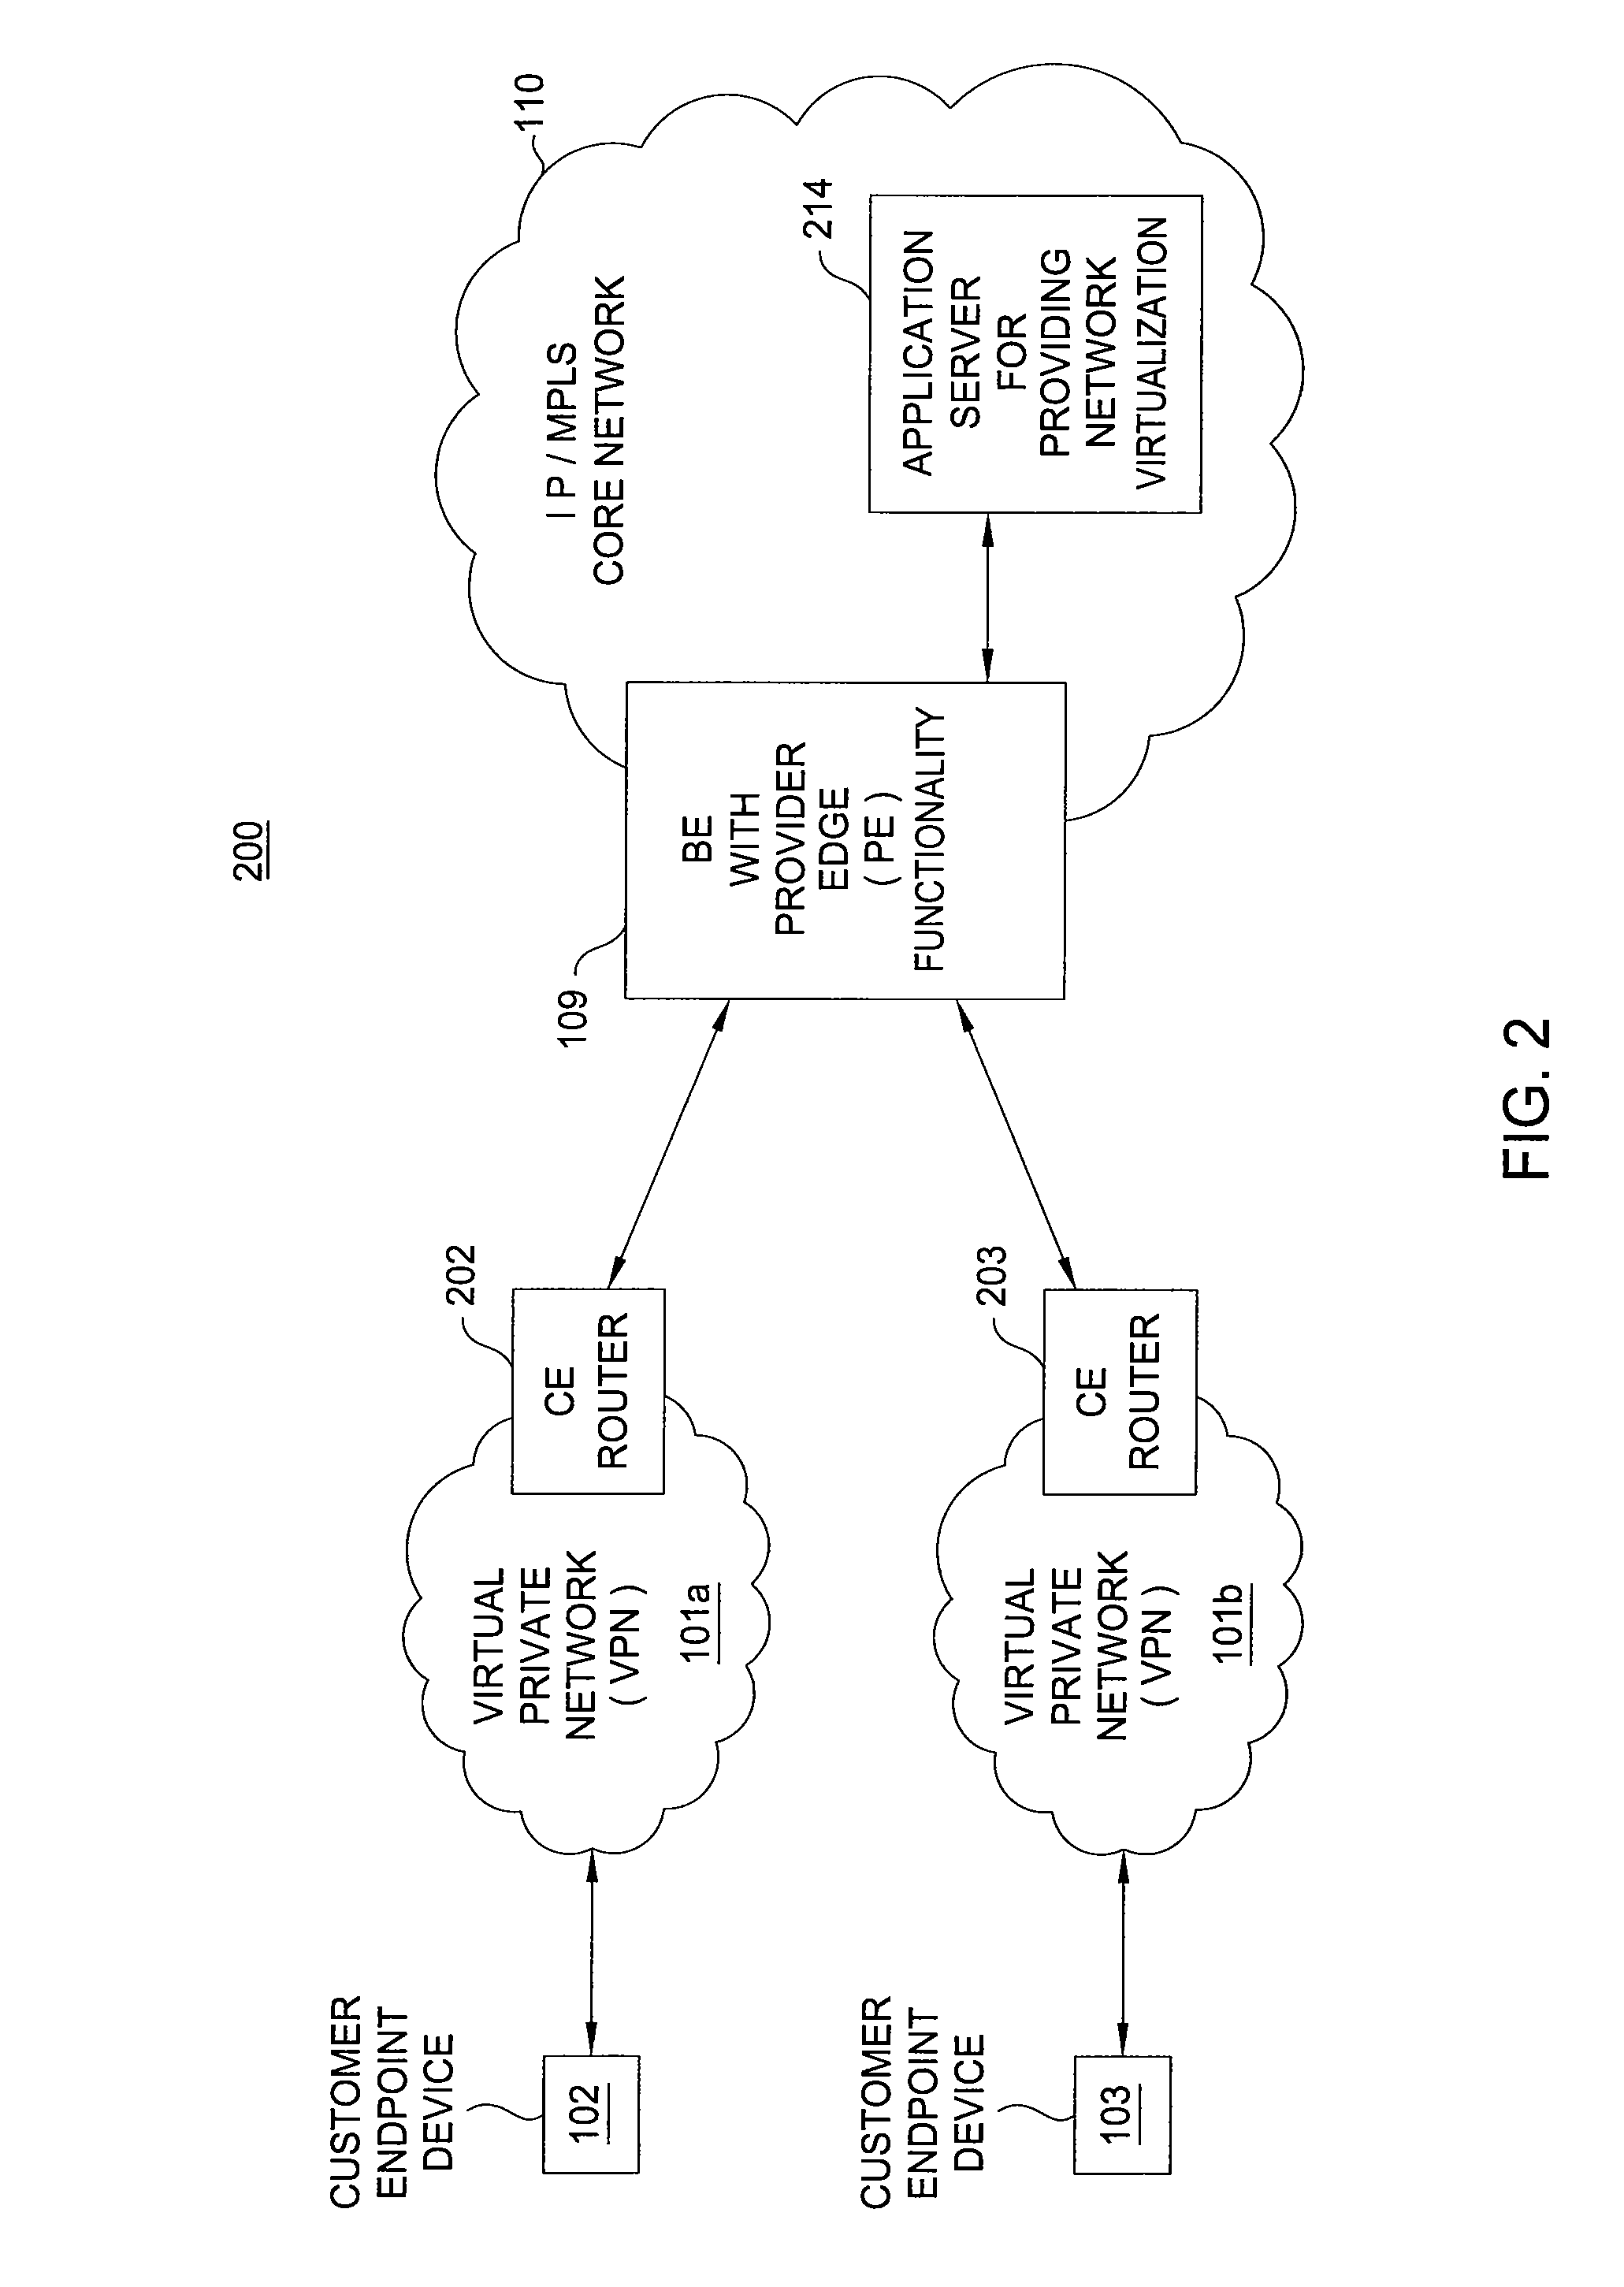 Method and apparatus for providing network virtualization